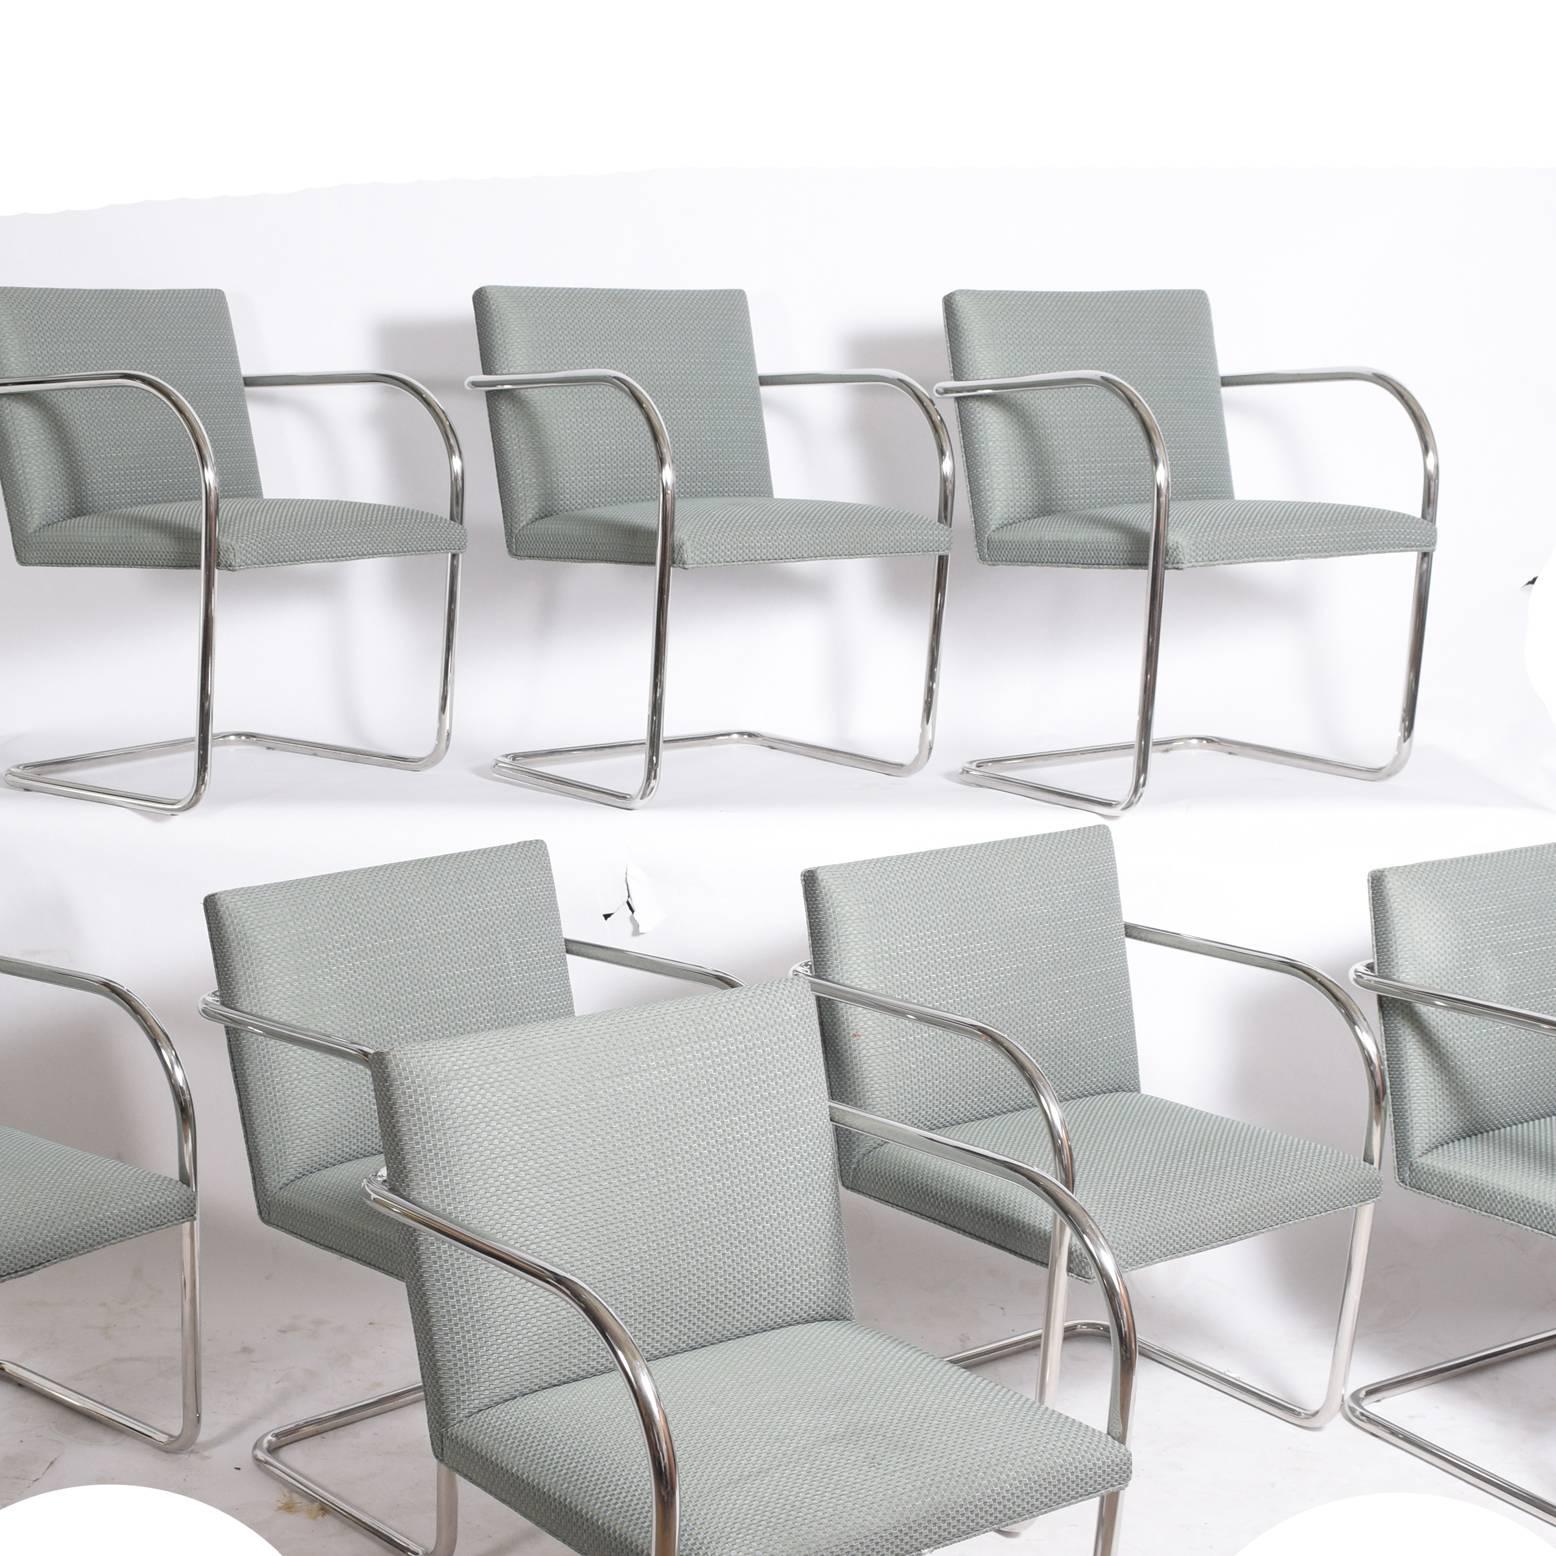 Bauhaus Set of Eight Stainless Steel Brno Chairs by Mies van der Rohe for Knoll Inc.